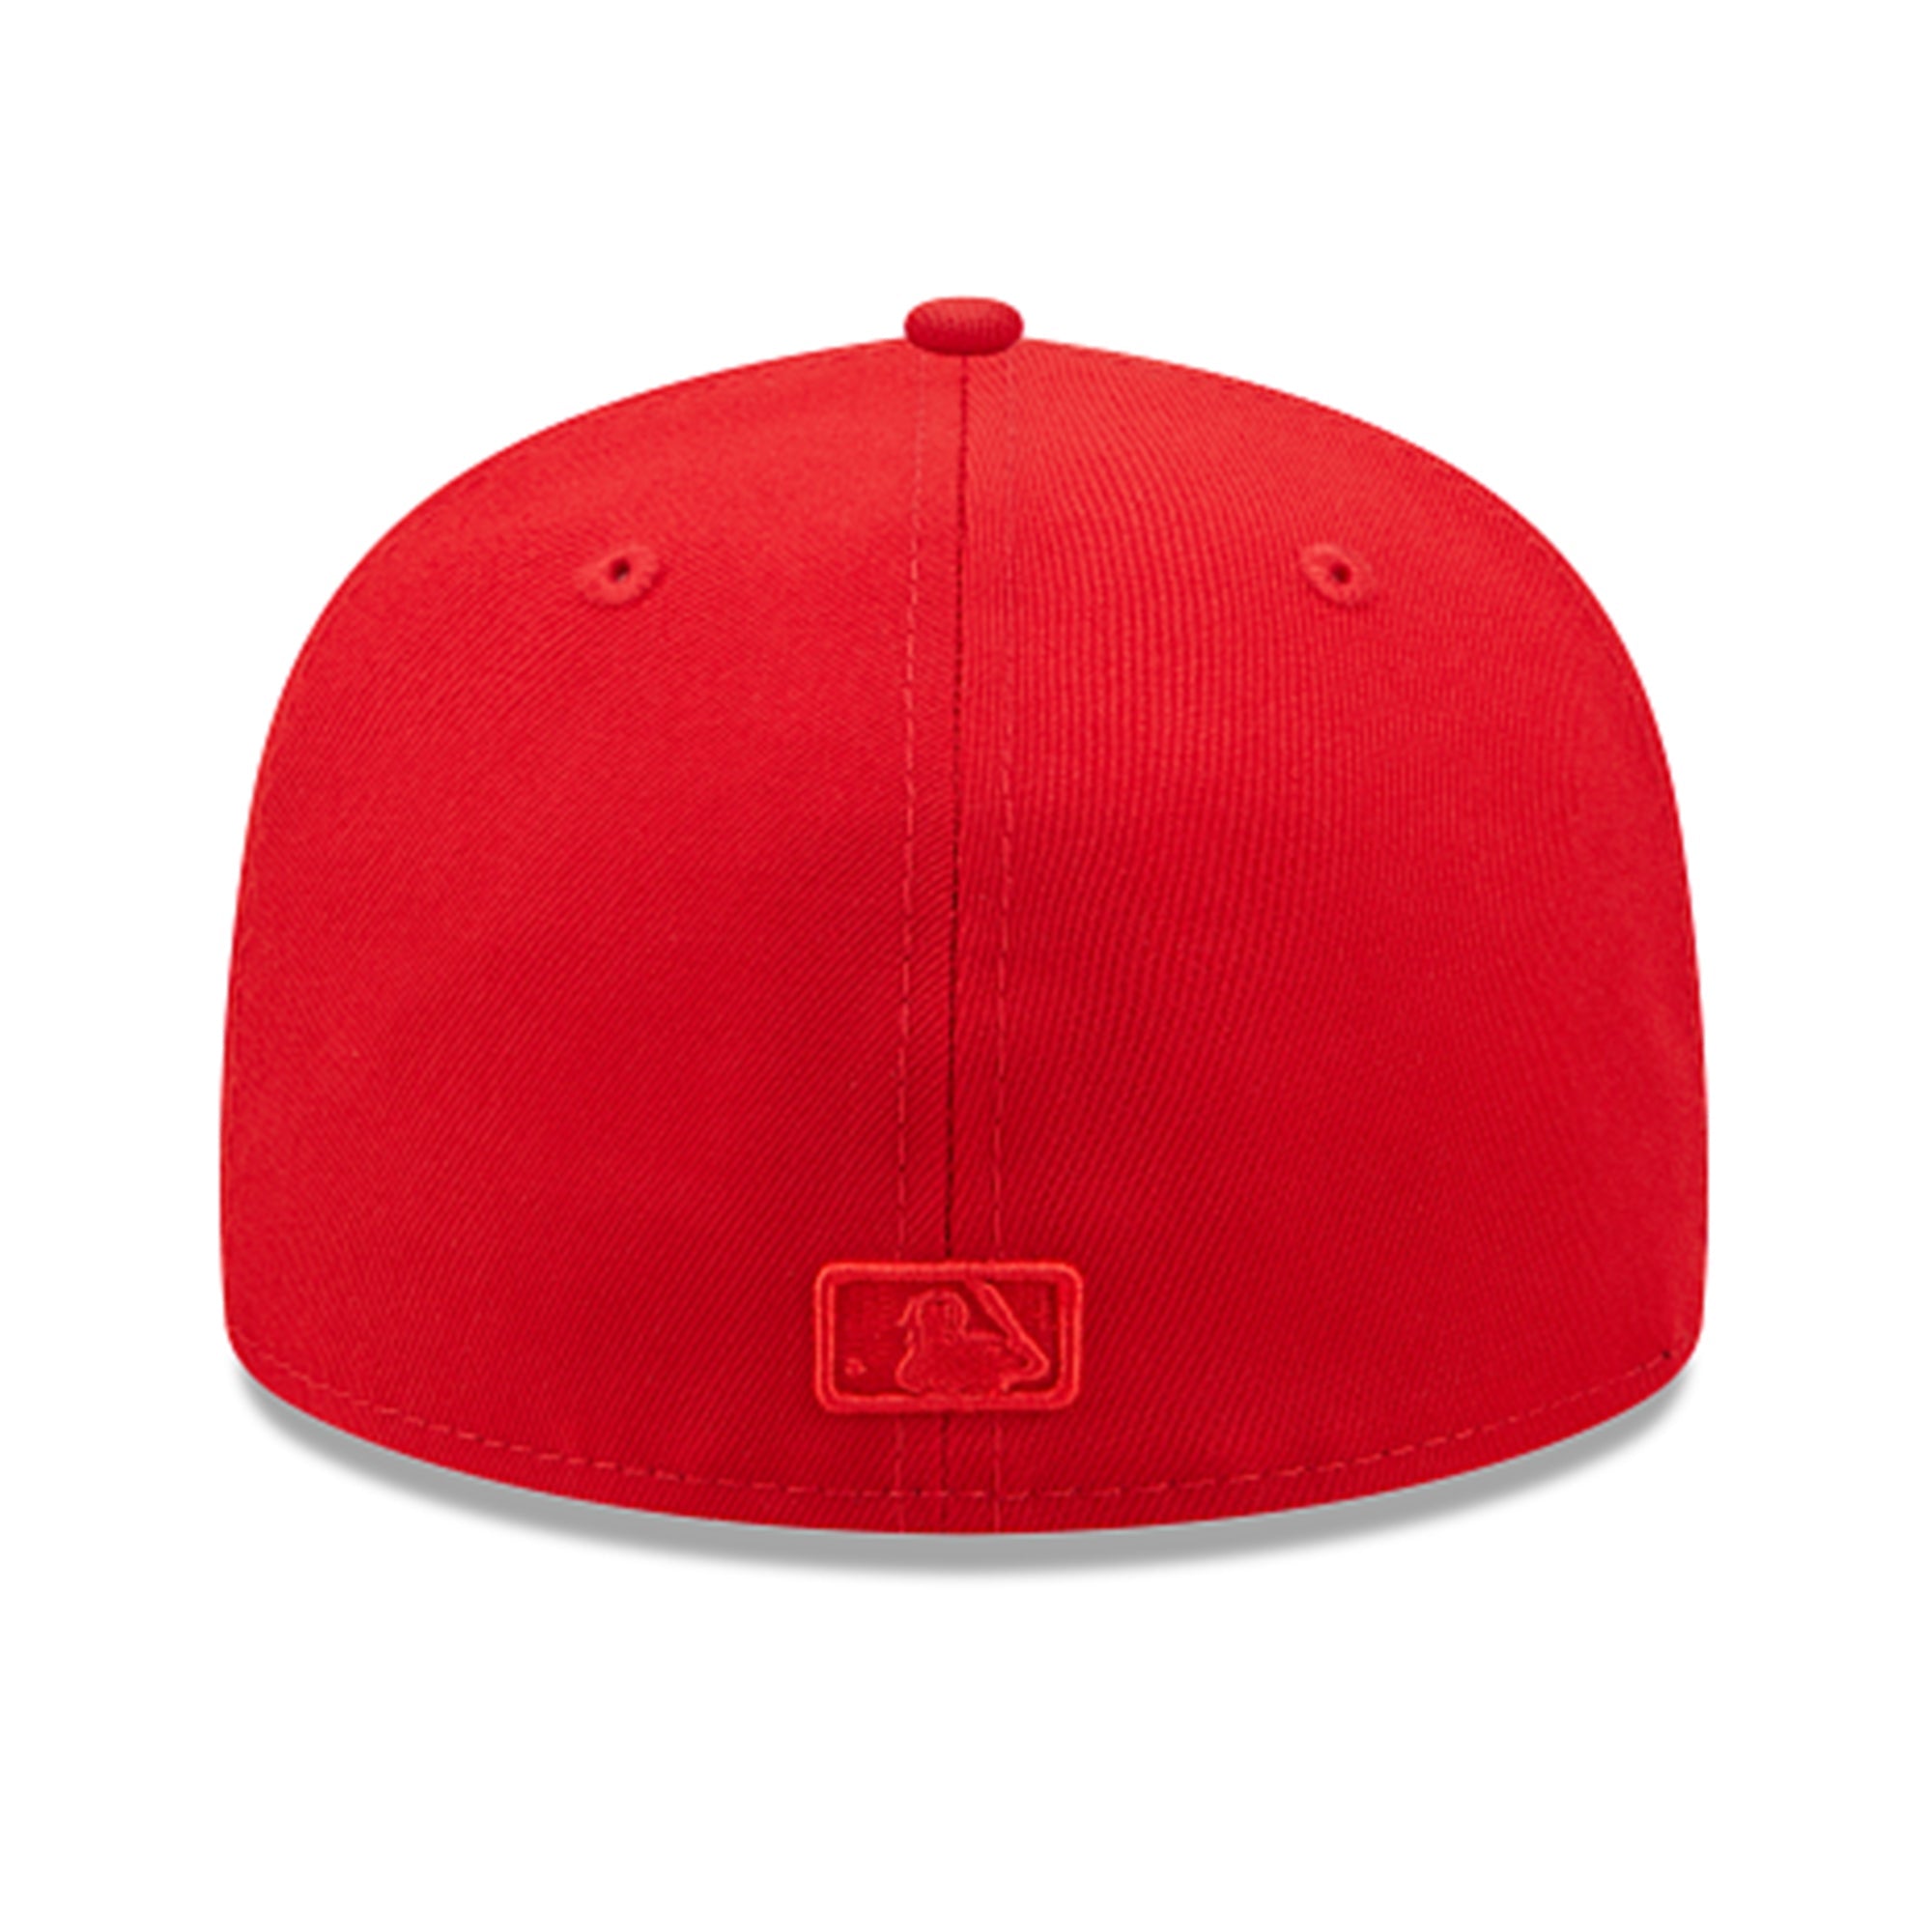 New Era New York Yankees Fitted Hat (Red)5